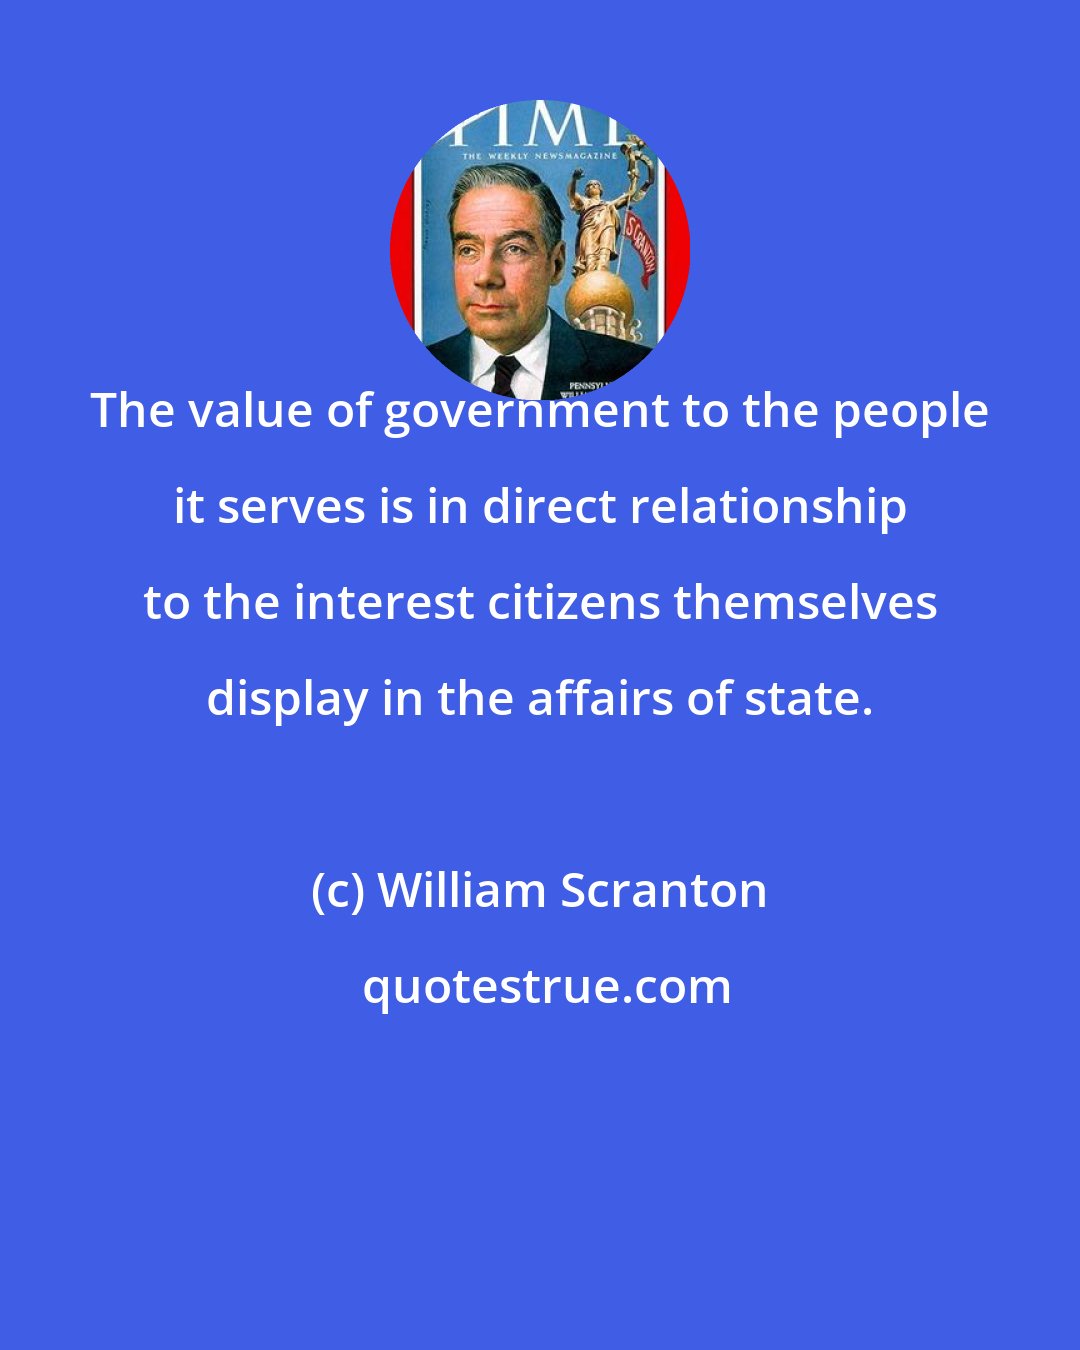 William Scranton: The value of government to the people it serves is in direct relationship to the interest citizens themselves display in the affairs of state.